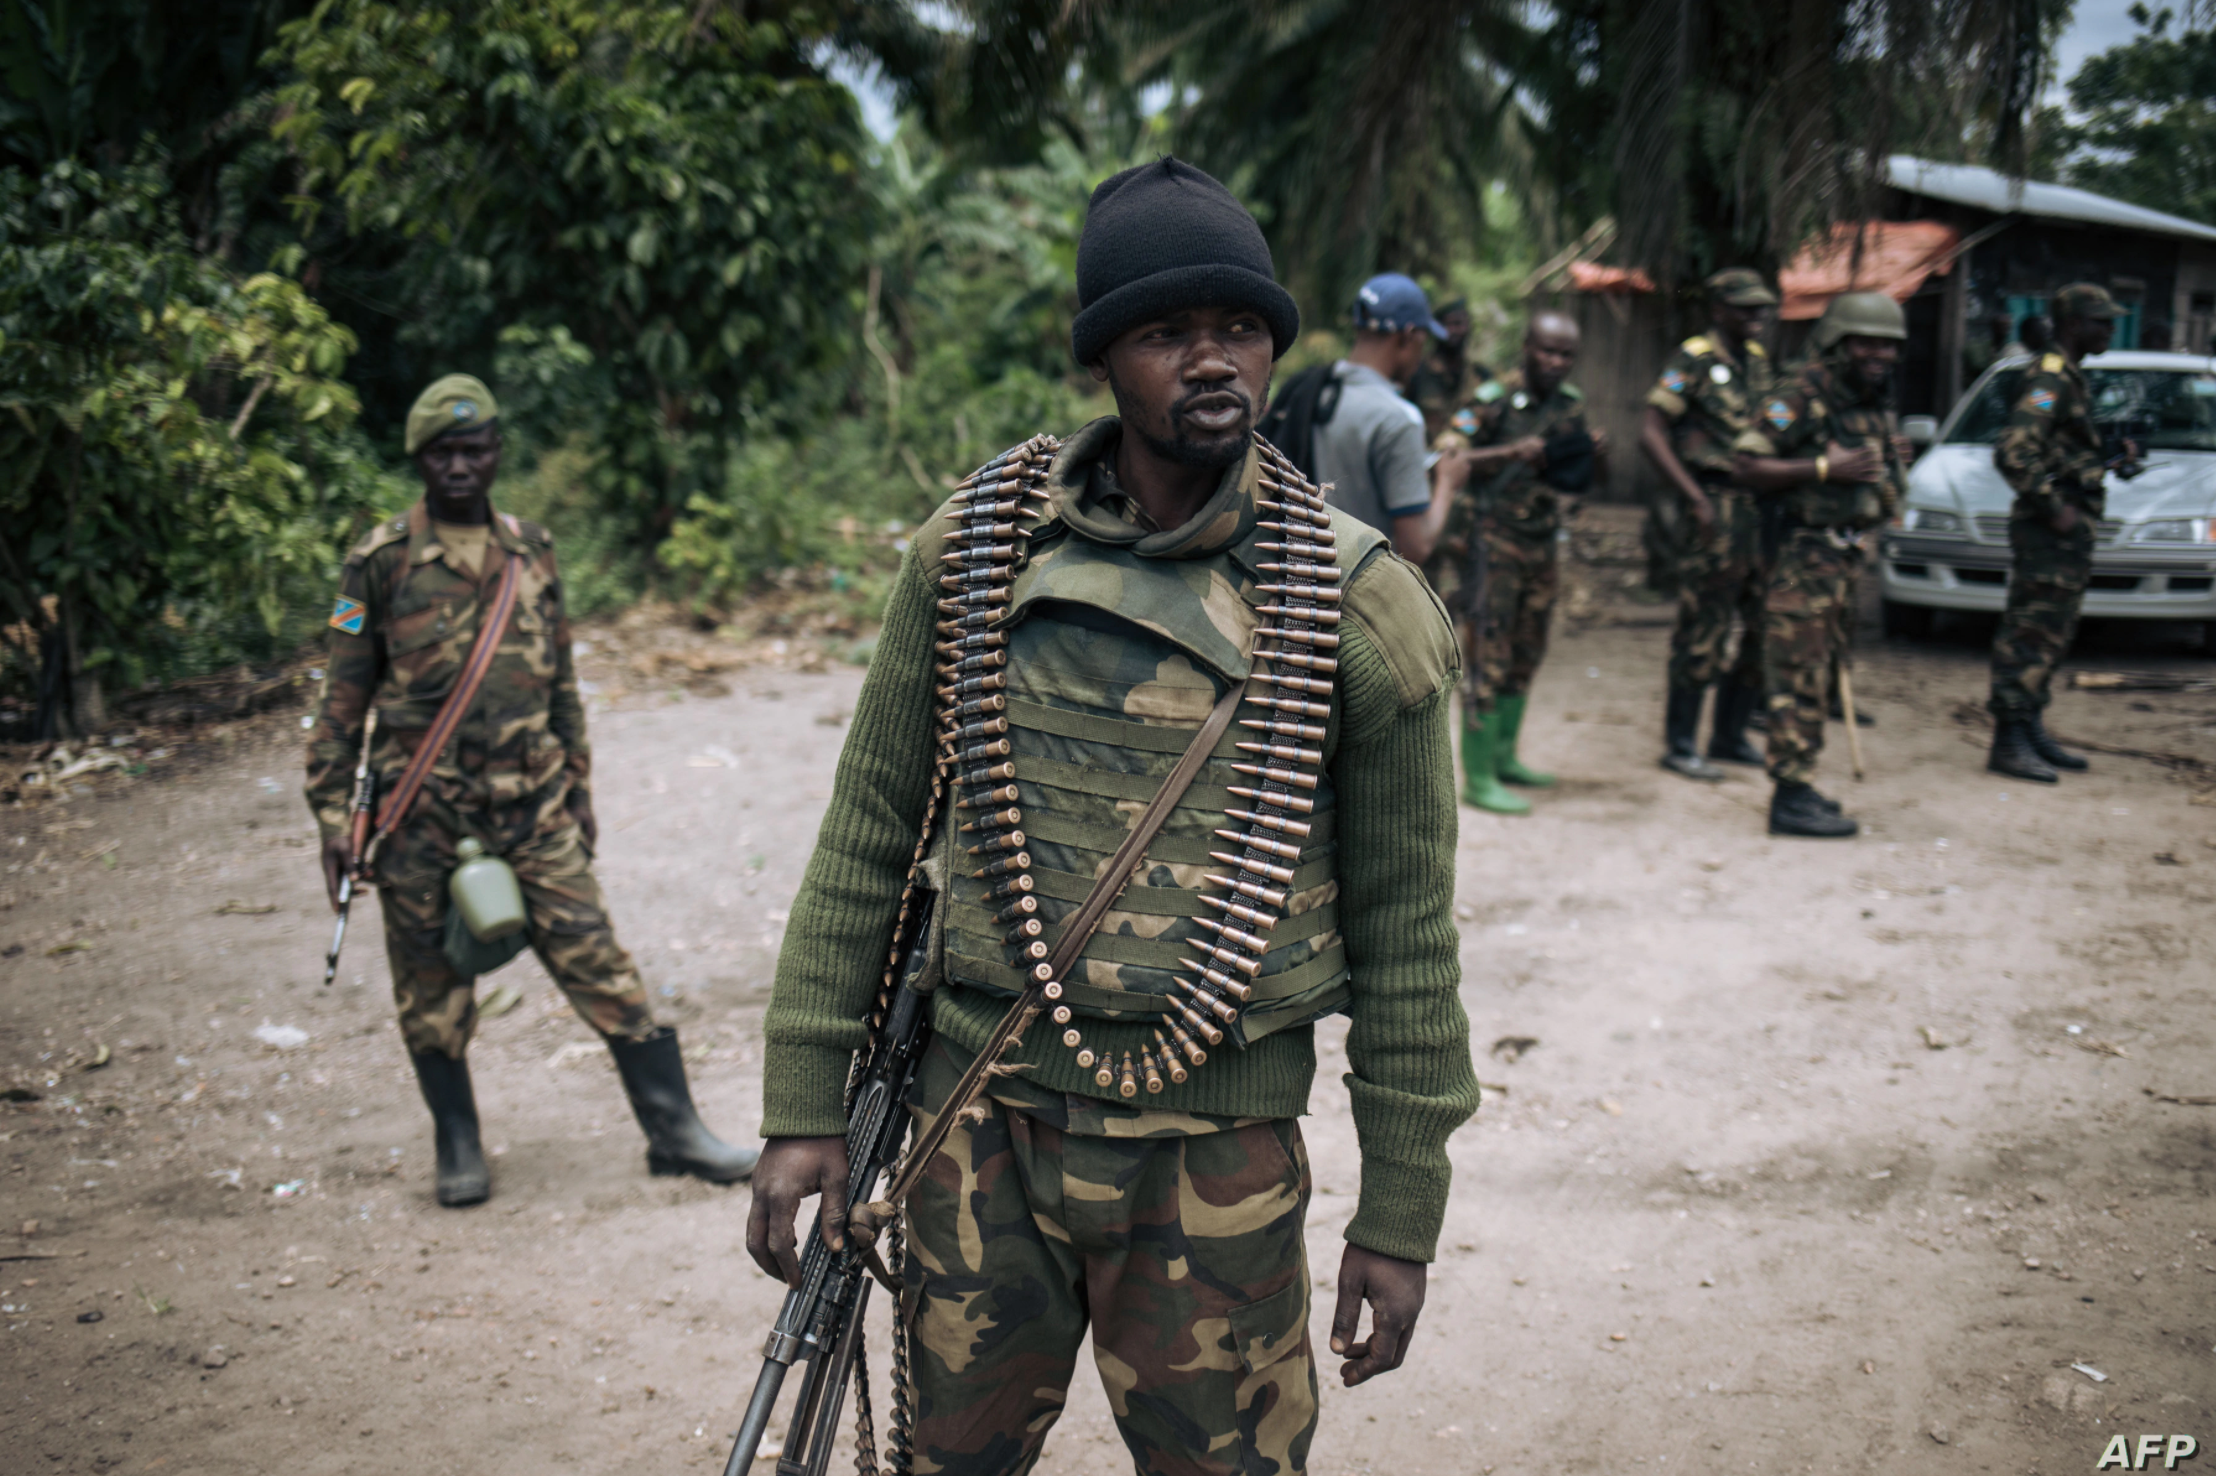 A Democratic Republic of Congo soldier is seen on patrol in the village of Manzalaho, near Beni, Feb. 18, 2020, following an alleged attack by members of the Allied Democratic Forces (ADF) rebel group.